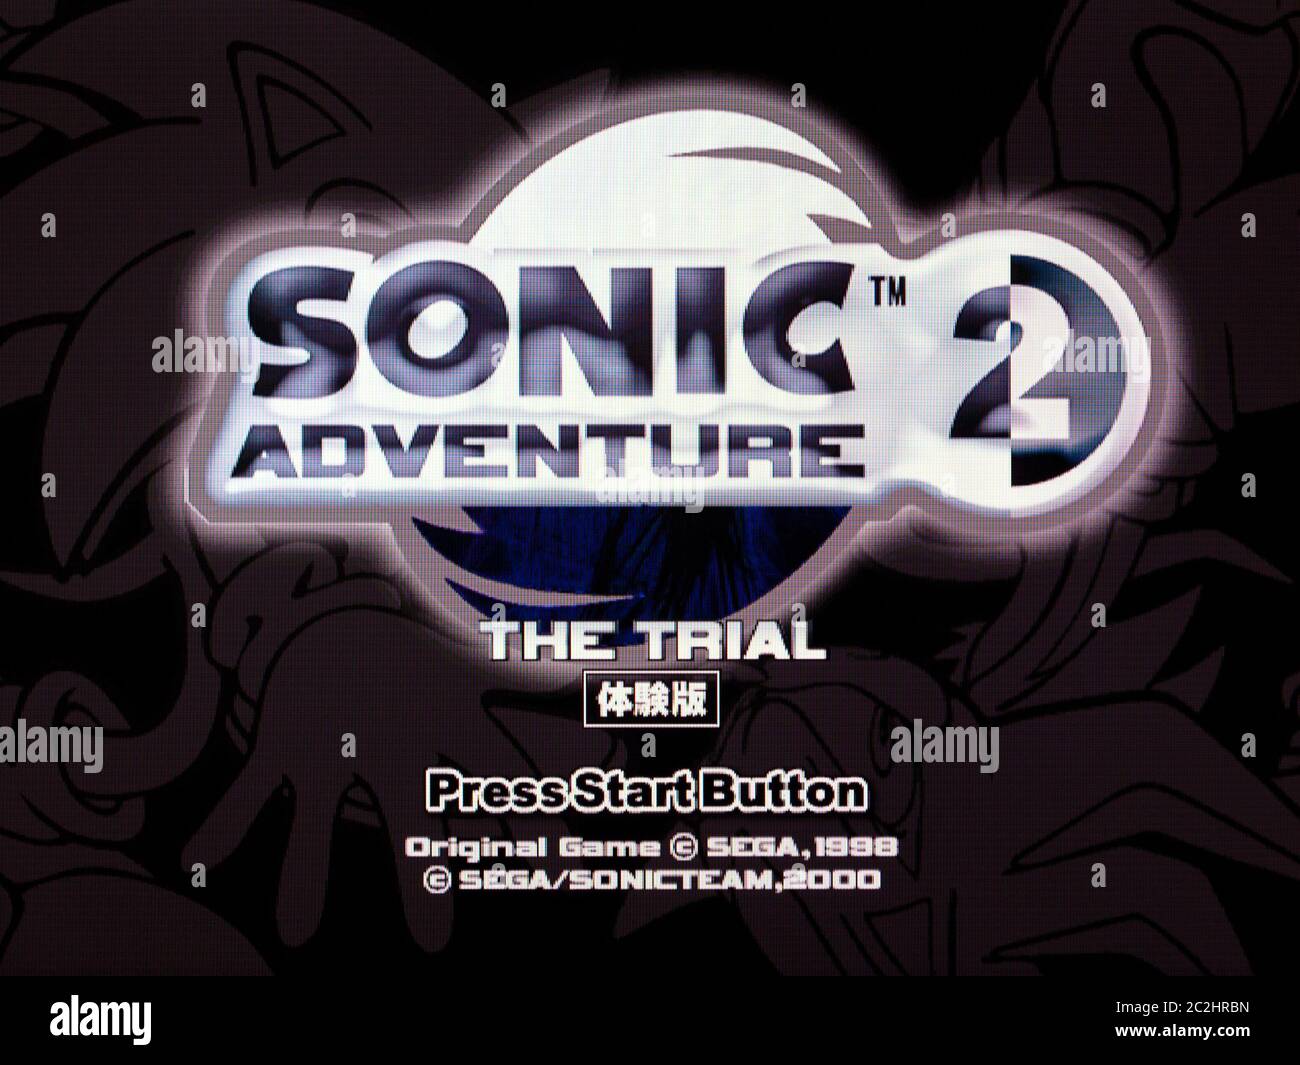 Sonic Adventure 2 The Trial - Sega Dreamcast Videogame - Editorial use only Stock Photo